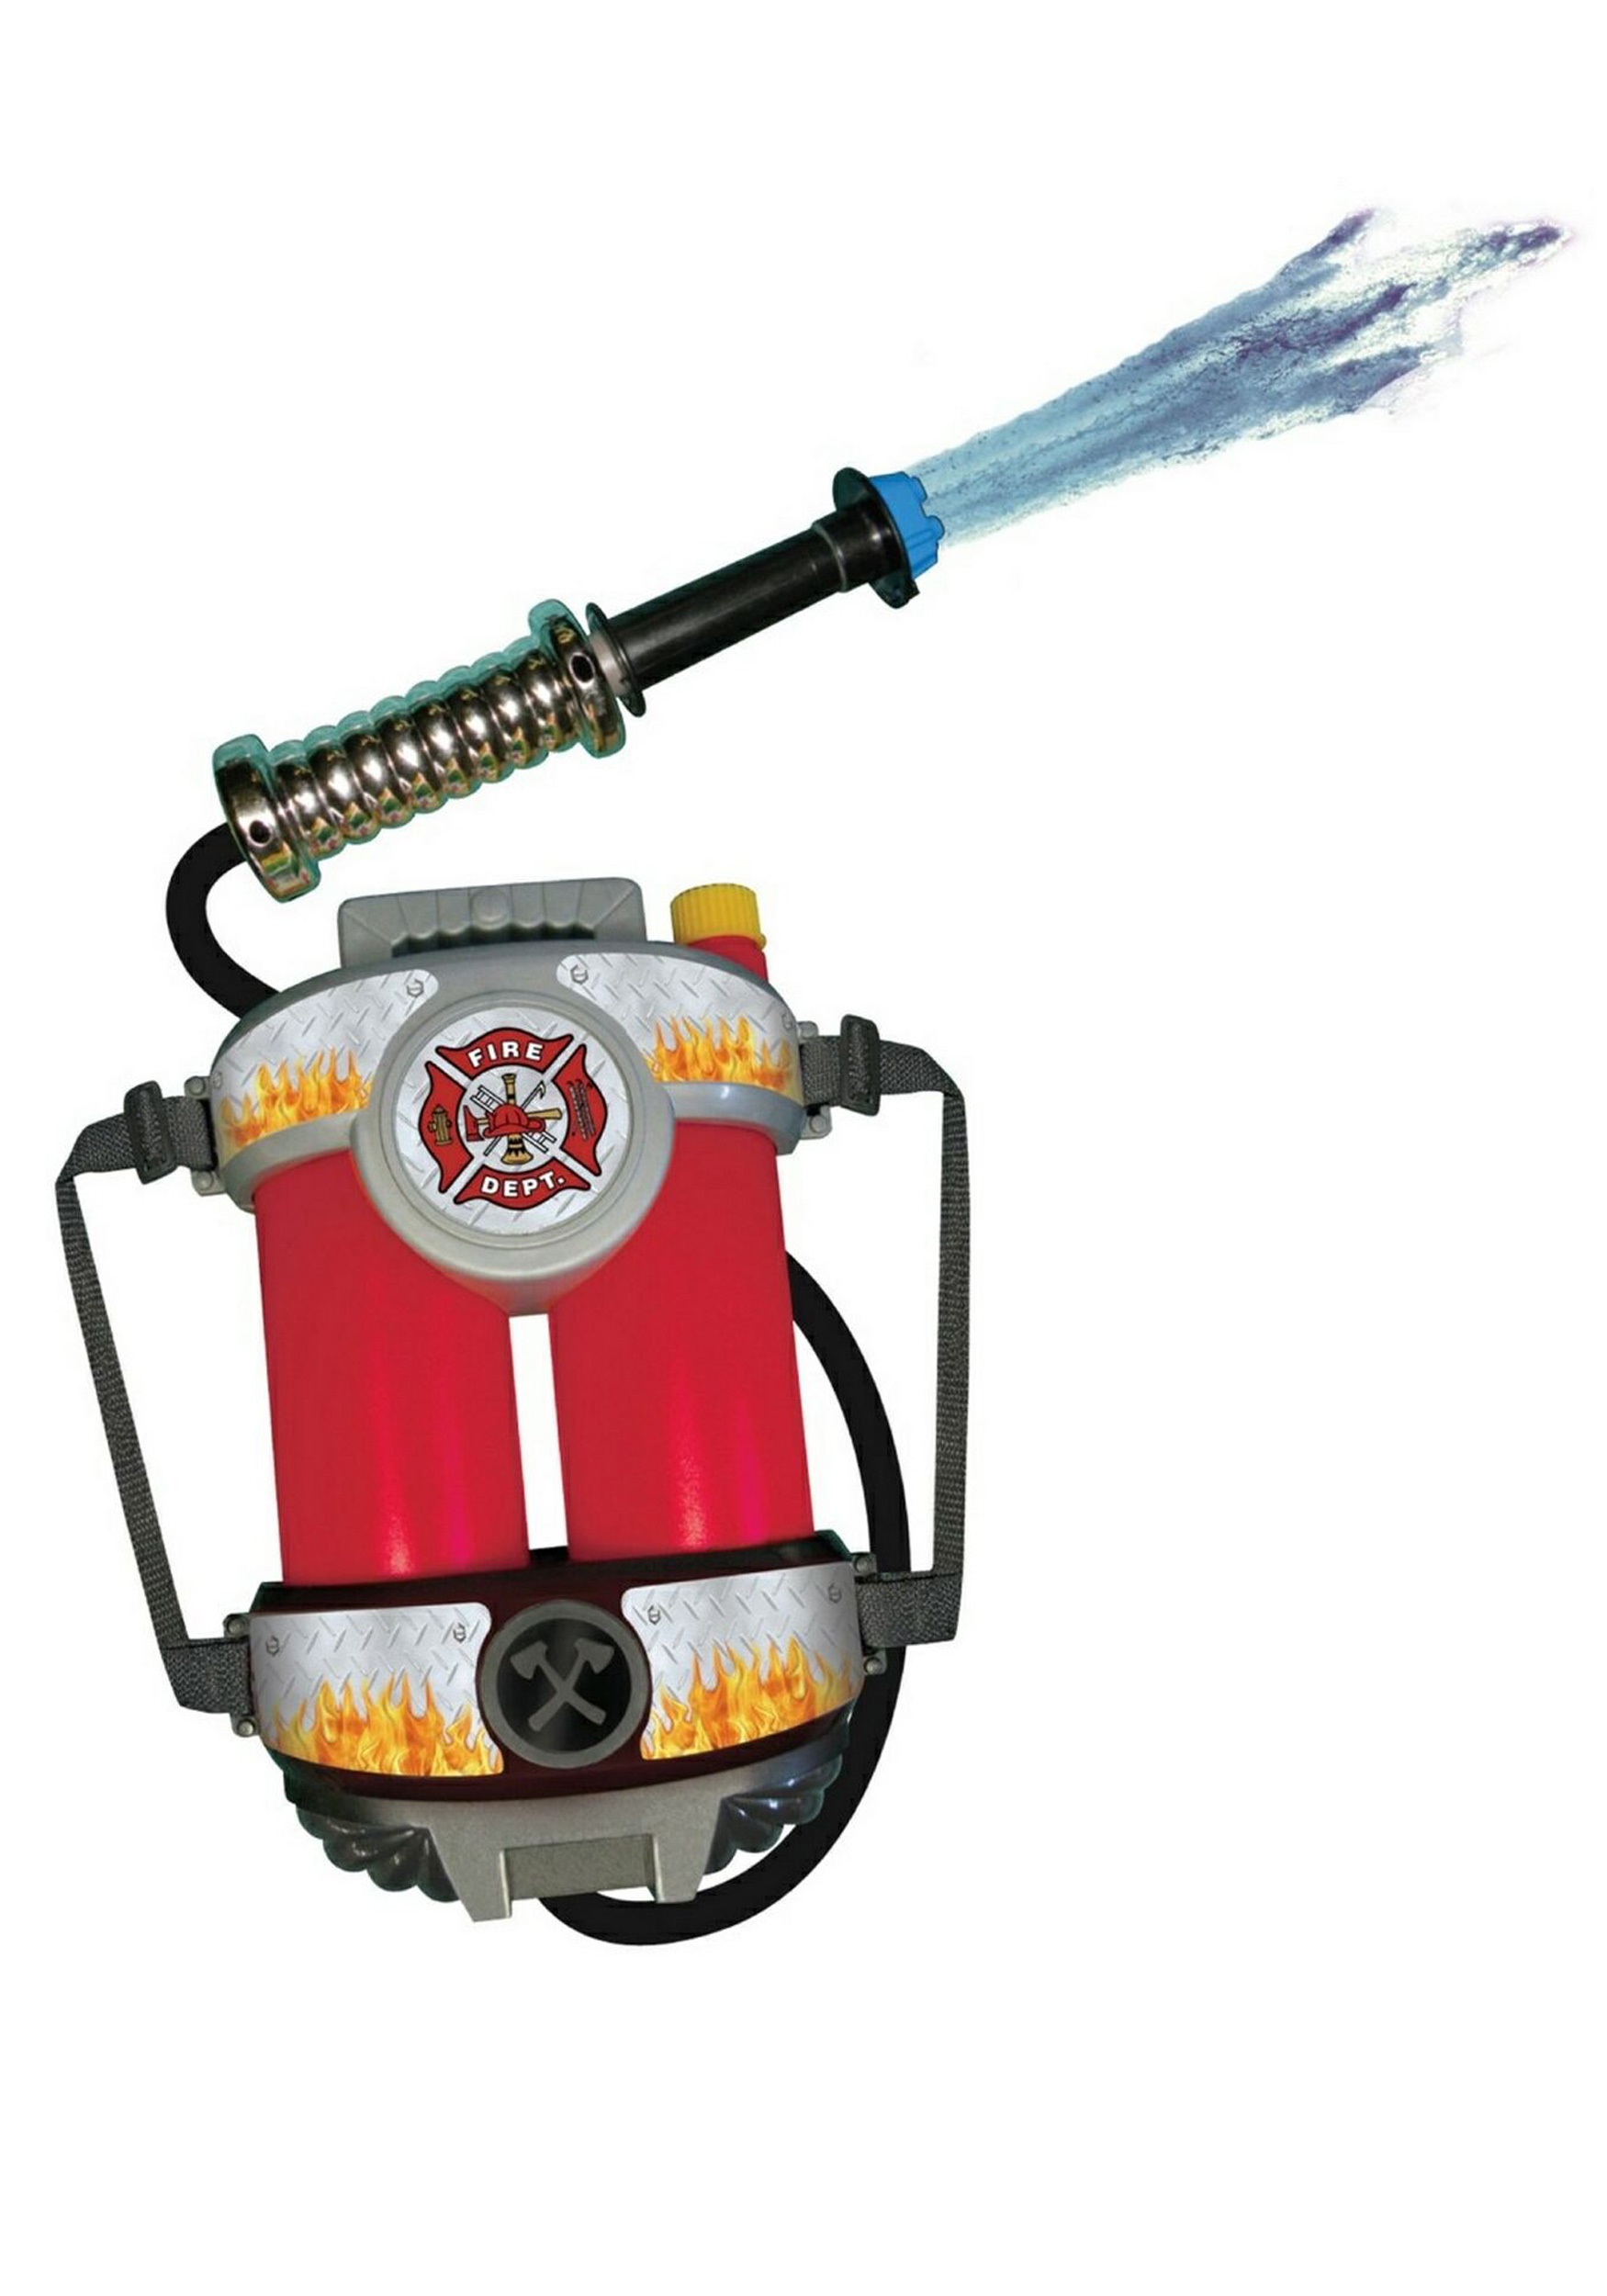 https://images.halloweencostumes.ca/products/5759/1-1/firefighter-hose-backpack.jpg